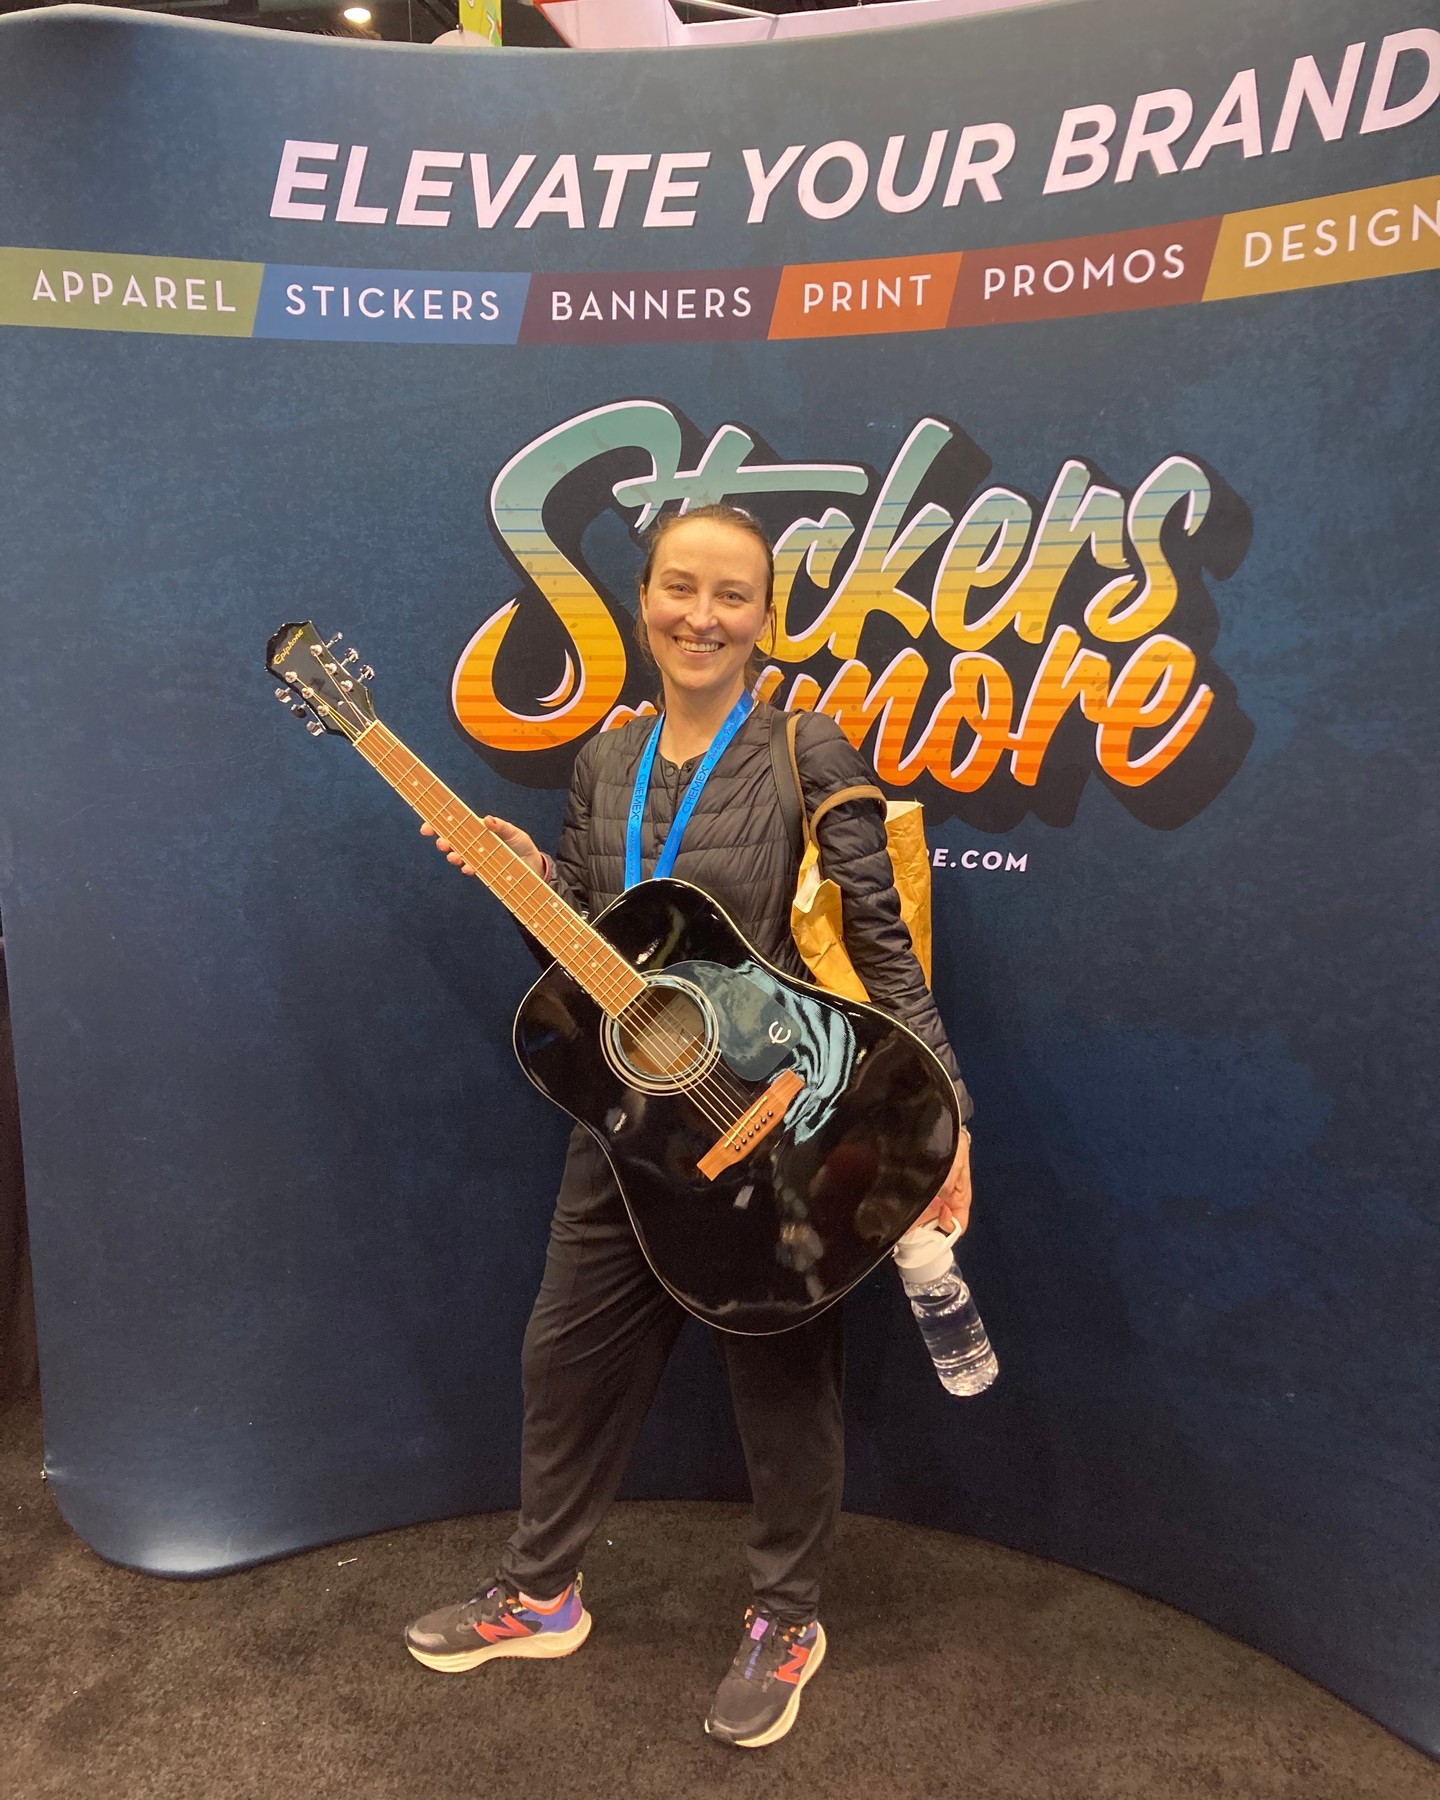 Guitar Winner from Coffee Specialty Conference in Chicago 🤟

Natalia from Chef Sergey's Bakery! 

#StickersAndMore
#ElevateYourBrand